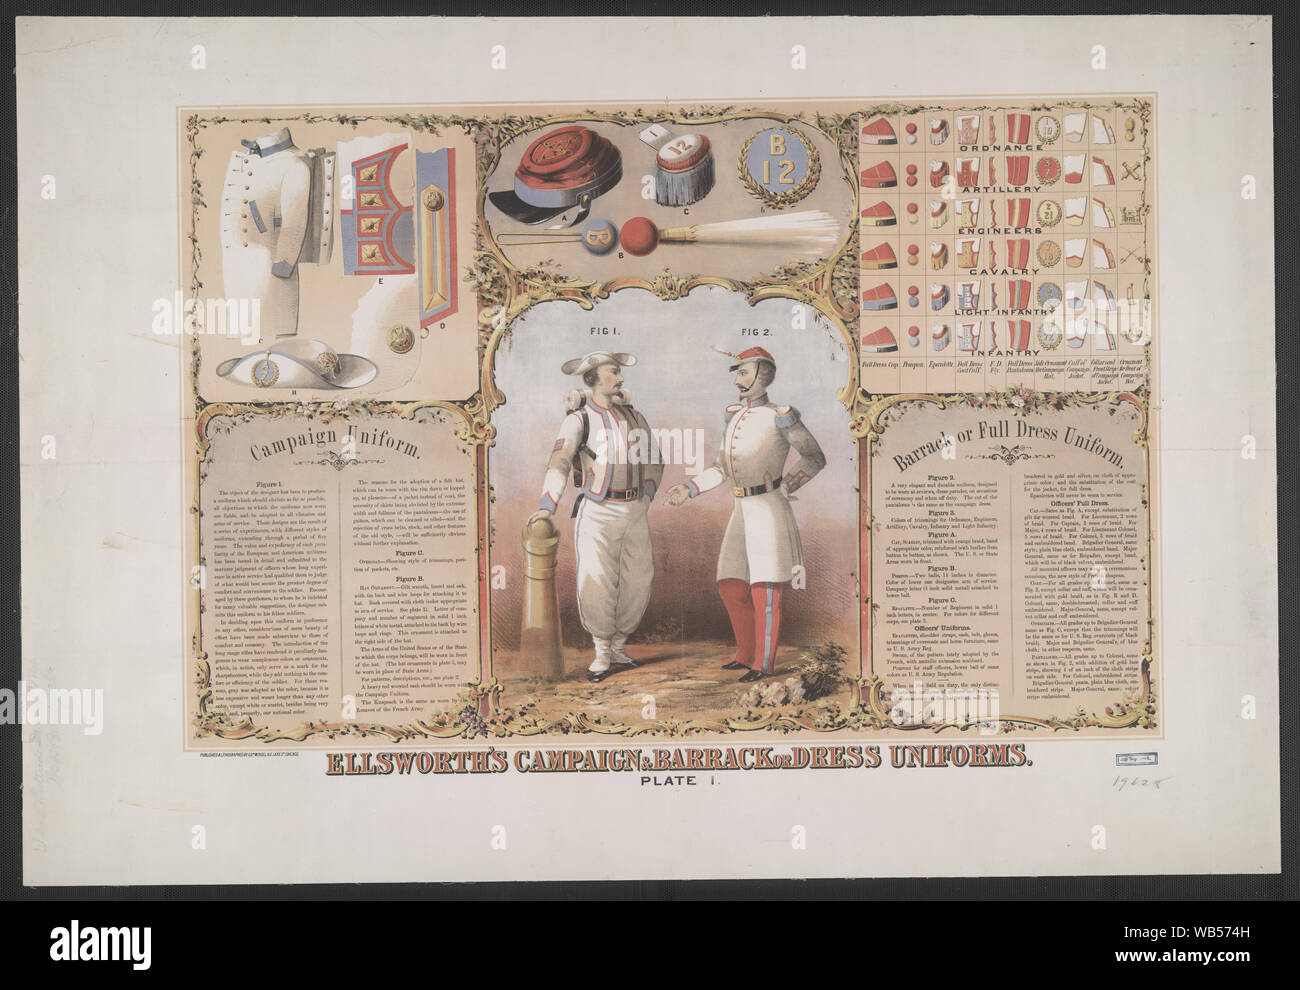 Ellsworth's campaign & barrack or dress uniforms. Plate 1 / published and lithographed by Edw. Mendel, 162 Lake St., Chicago. Abstract/medium: 1 print : chomolithograph ; 66.7 x 97.1 cm Stock Photo